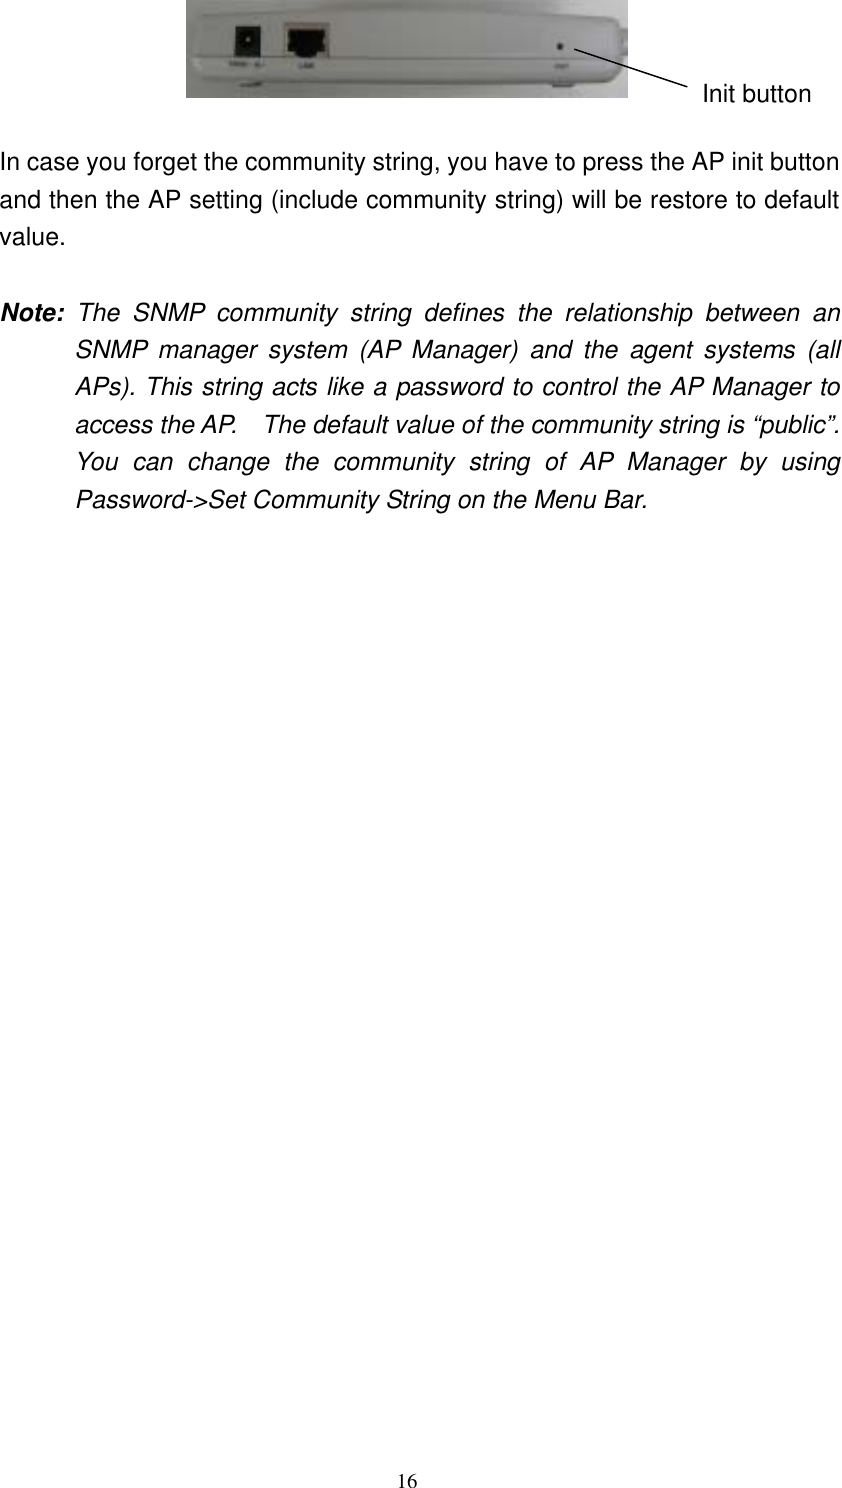 16    In case you forget the community string, you have to press the AP init button and then the AP setting (include community string) will be restore to default value.    Note: The SNMP community string defines the relationship between an SNMP manager system (AP Manager) and the agent systems (all APs). This string acts like a password to control the AP Manager to access the AP.    The default value of the community string is “public”. You can change the community string of AP Manager by using Password-&gt;Set Community String on the Menu Bar. Init button